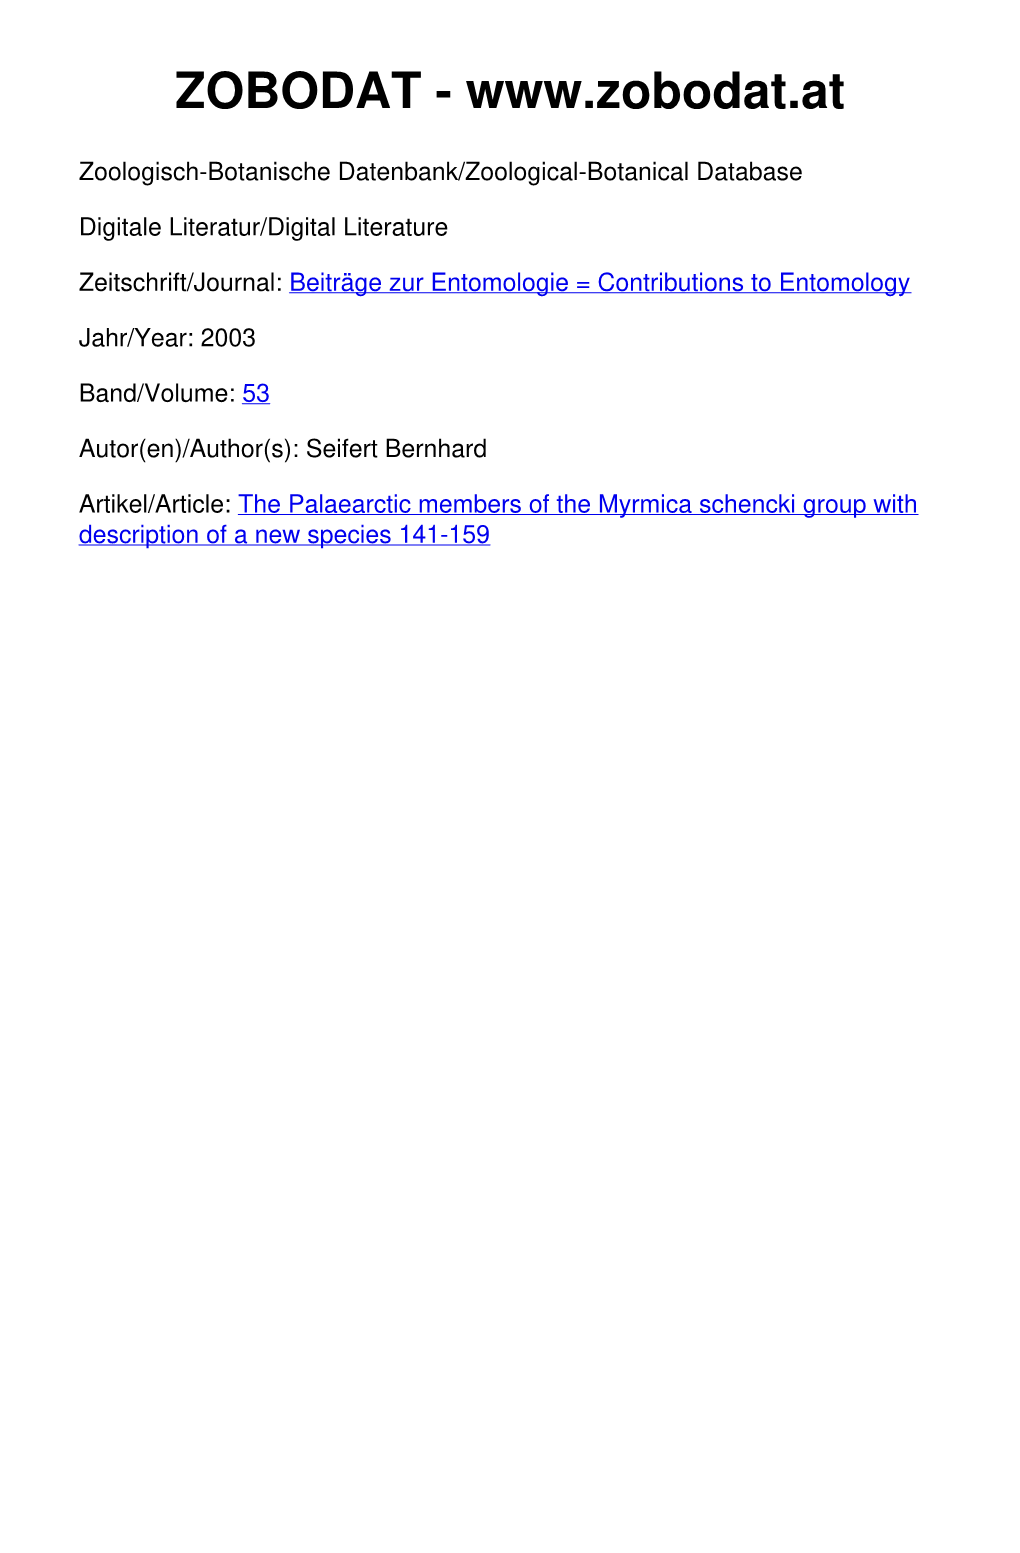 The Palaearctic Members of the Myrmica Schencki Group with Description of a New Species 141-159 © Download